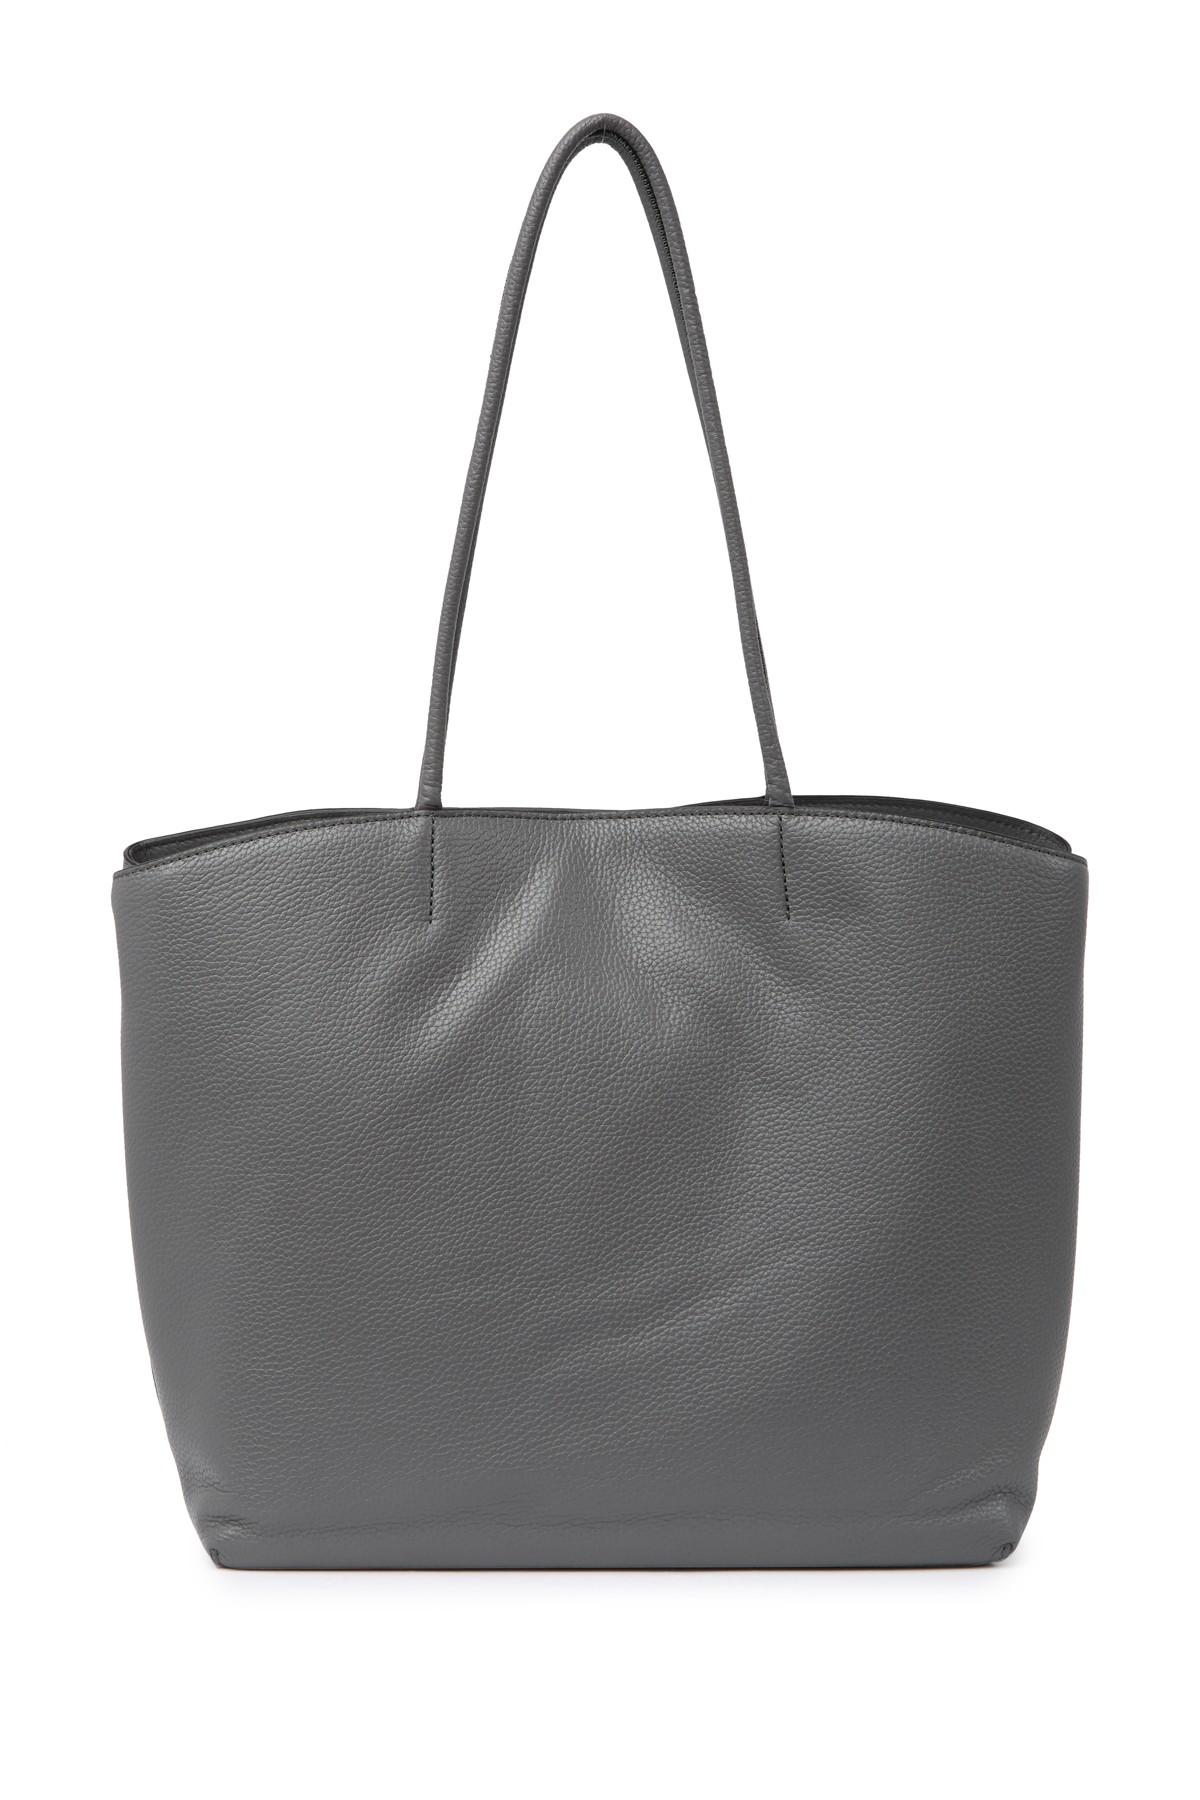 Marc Jacobs Supple Leather Tote Bag in Gray - Lyst